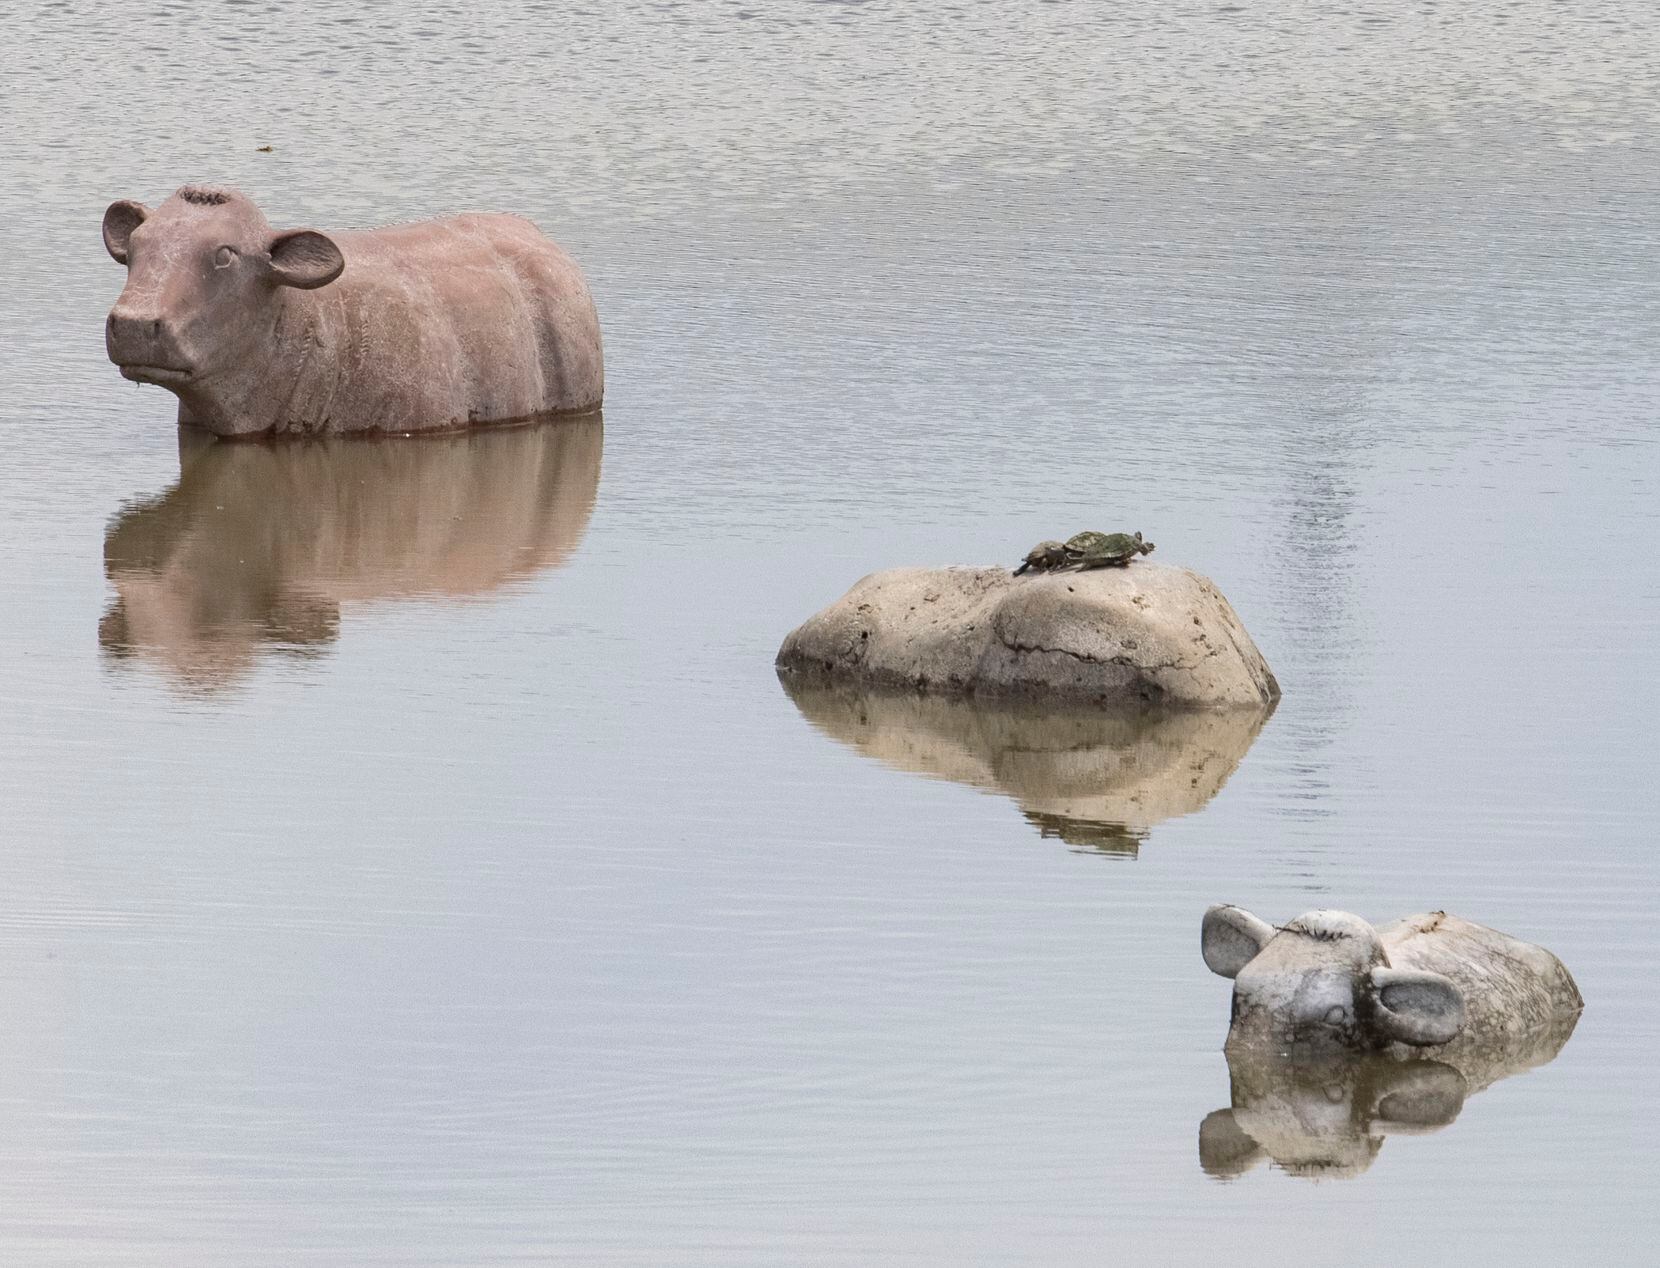 Turtles sunbathe on a cow at a flooded Trammell Crow Park as the lake and Trinity River have high levels of water from the rainy weather on Wednesday, June 2, 2021, in Dallas.